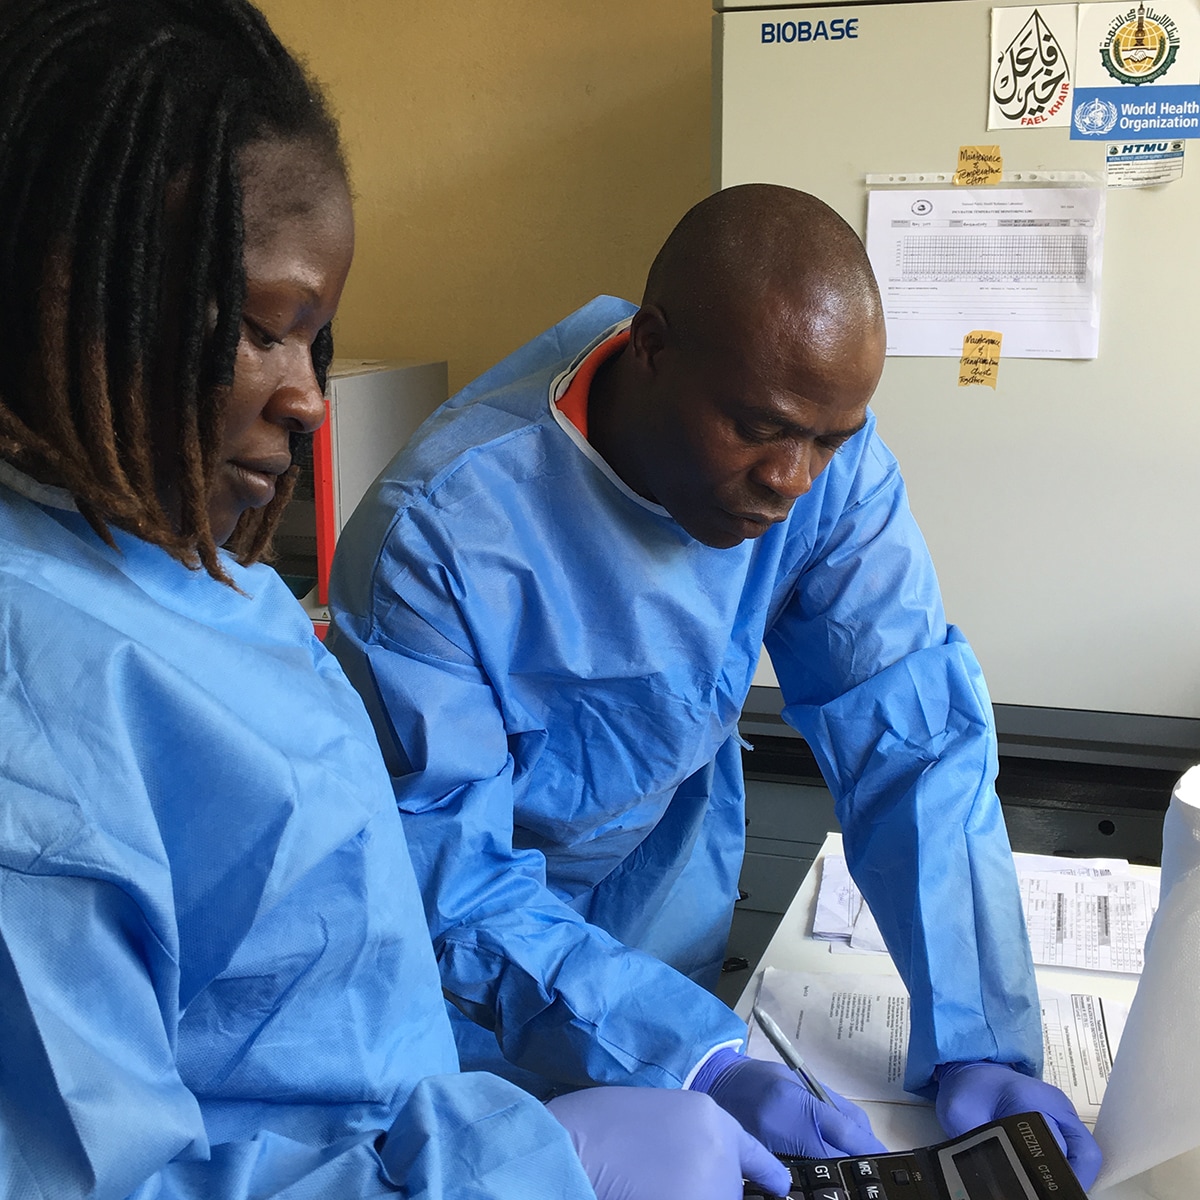 Liberia NPHI bioengineers perform training calculations to assess and repair bio safety cabinets. Photo: Dennis Jarvis, CDC